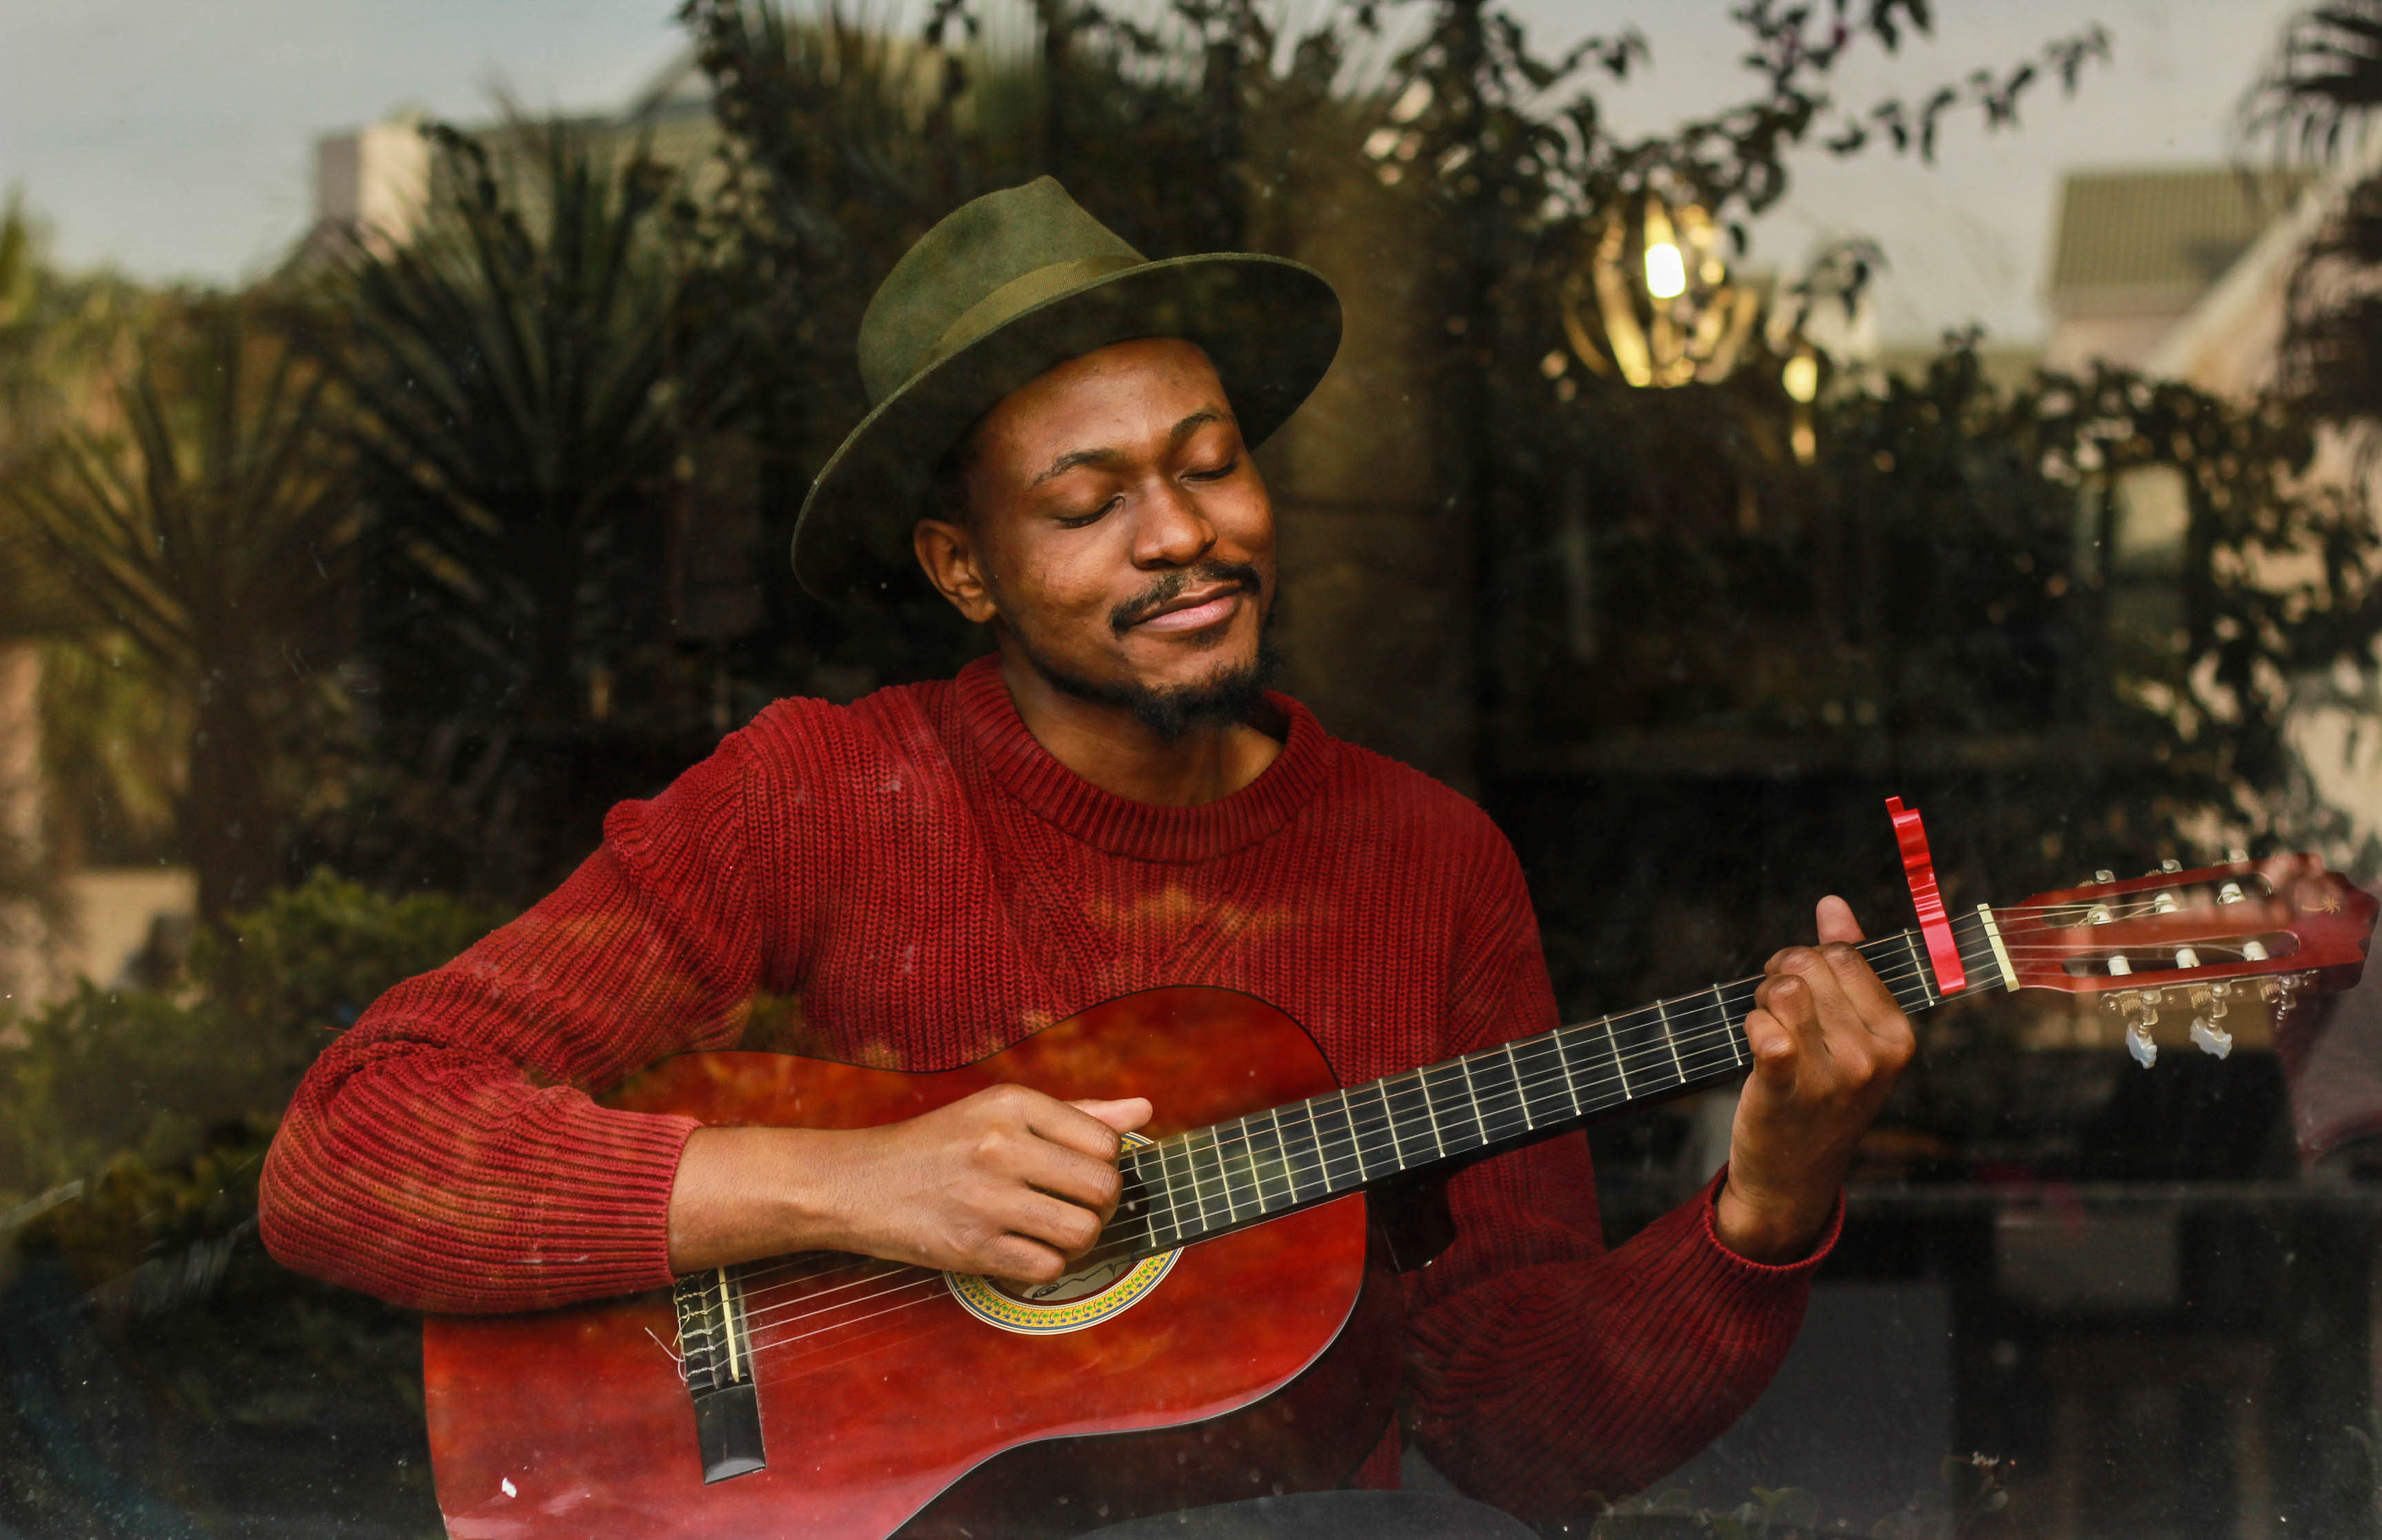 Man in a red sweater and green hat playing an acoustic guitar with a content expression on his face